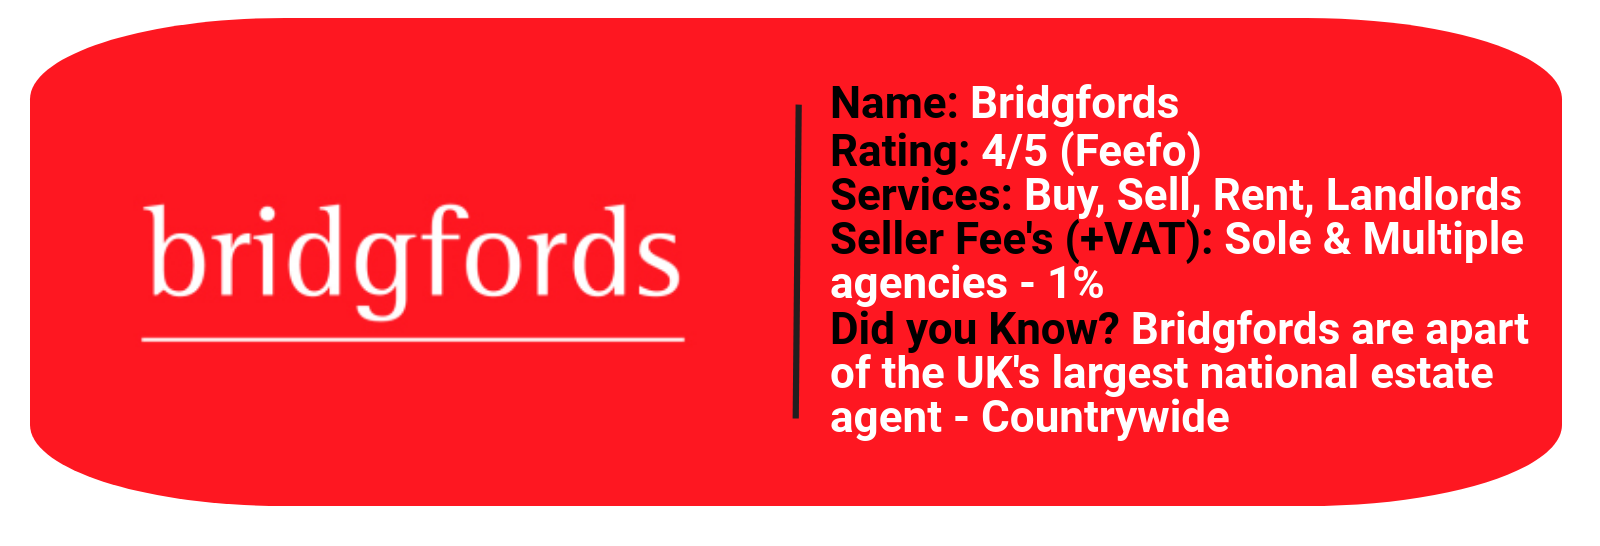 Bridgford statistics featuring rating, services & seller fee's